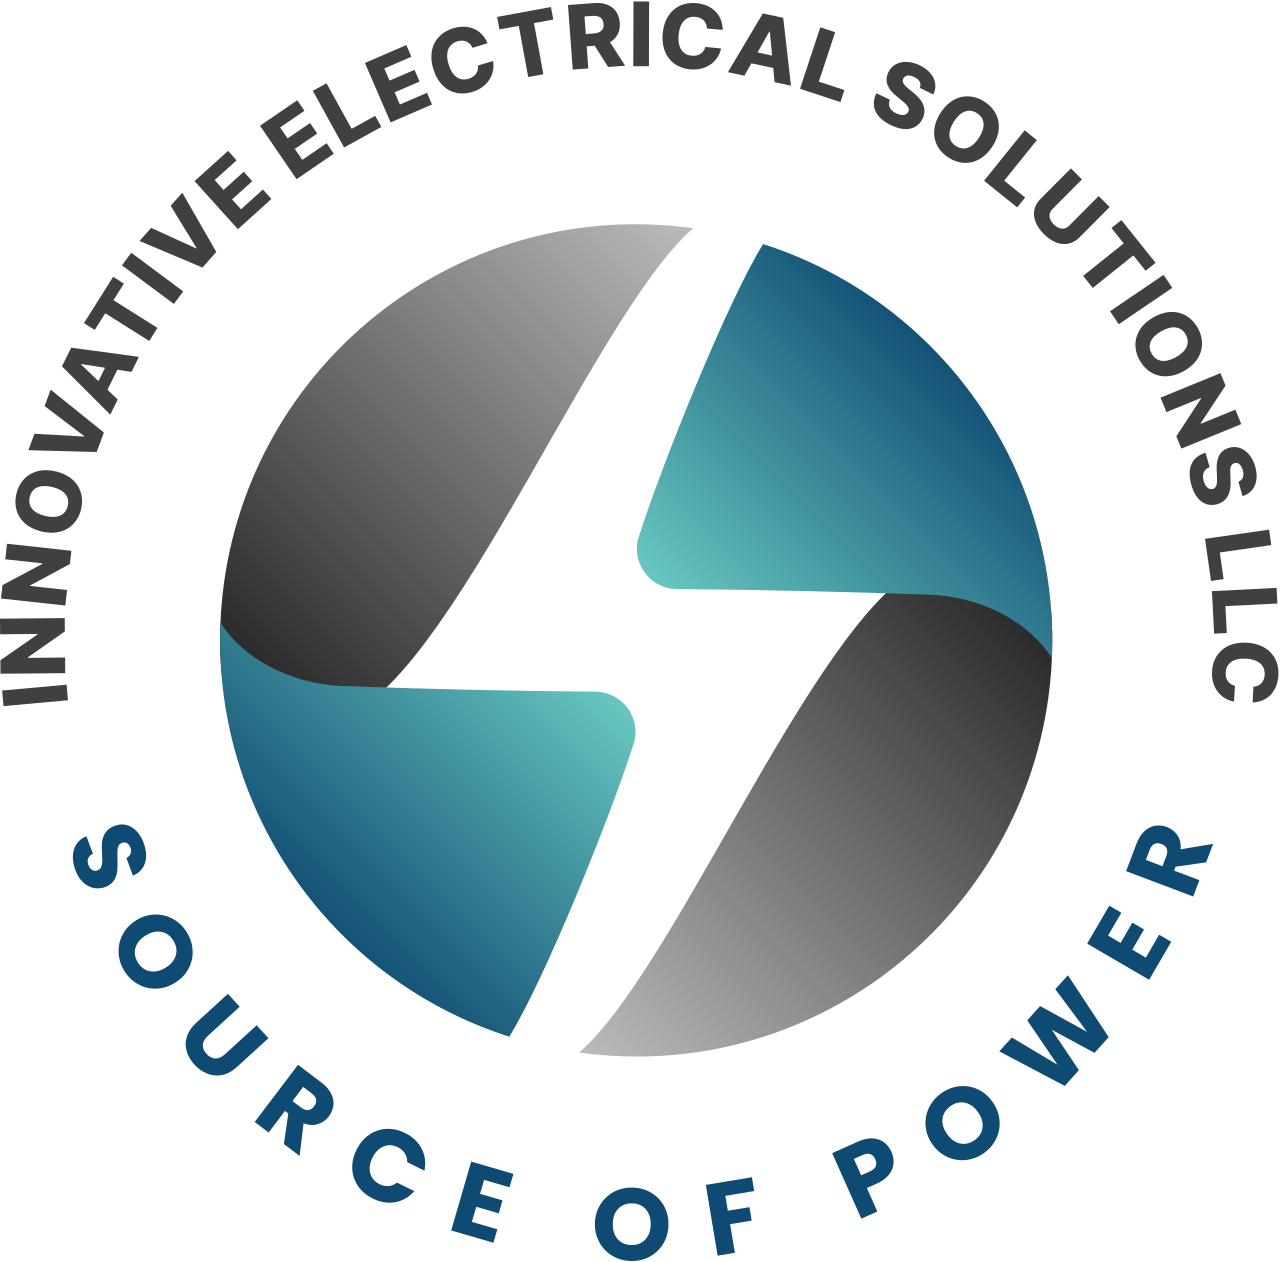 INNOVATIVE ELECTRICAL SOLUTIONS LLC's web page